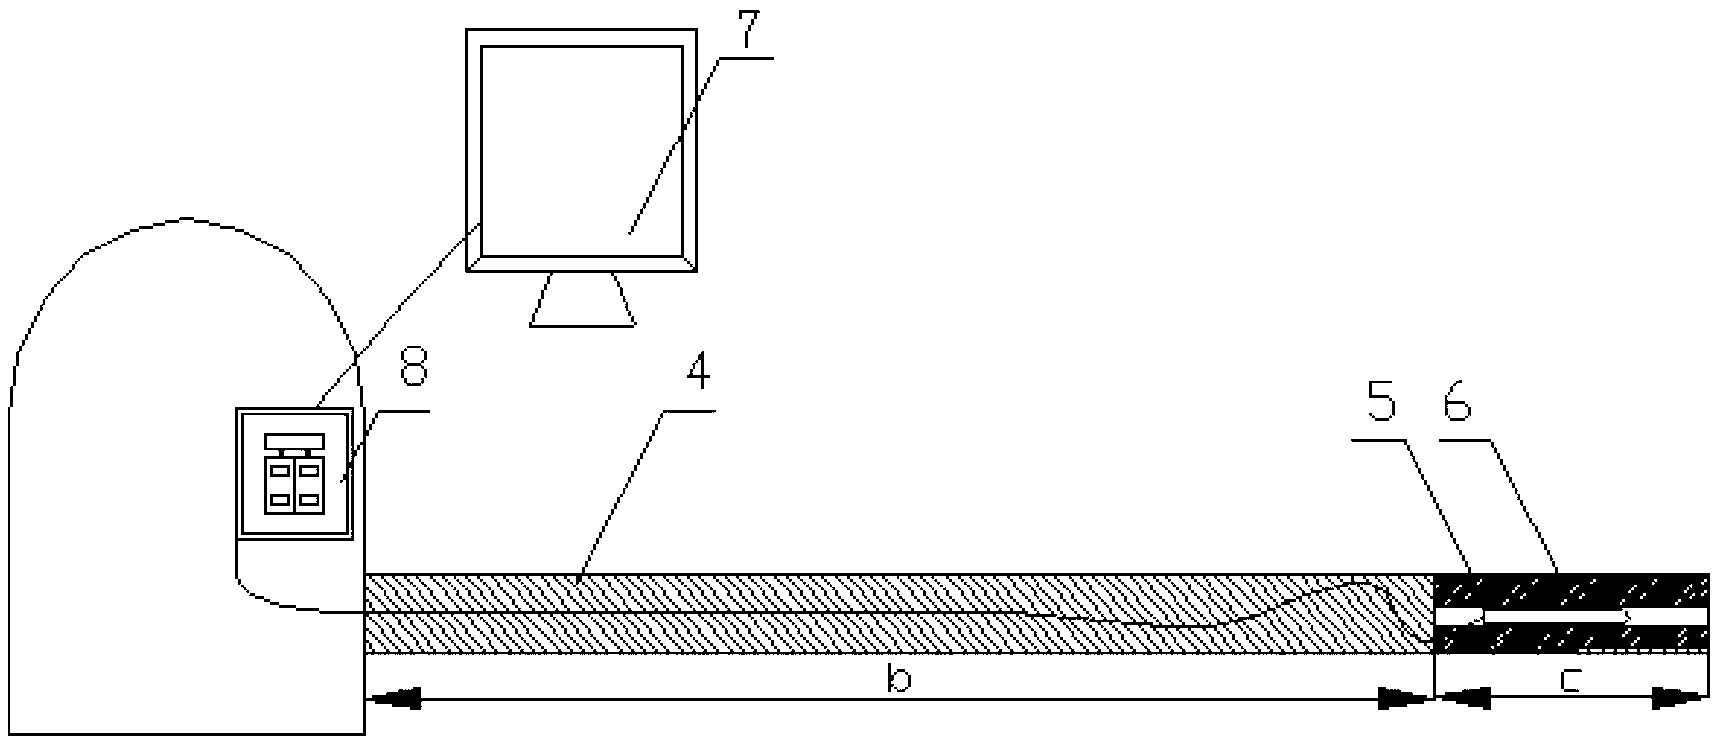 Method for testing mining-induced three-dimensional stress field